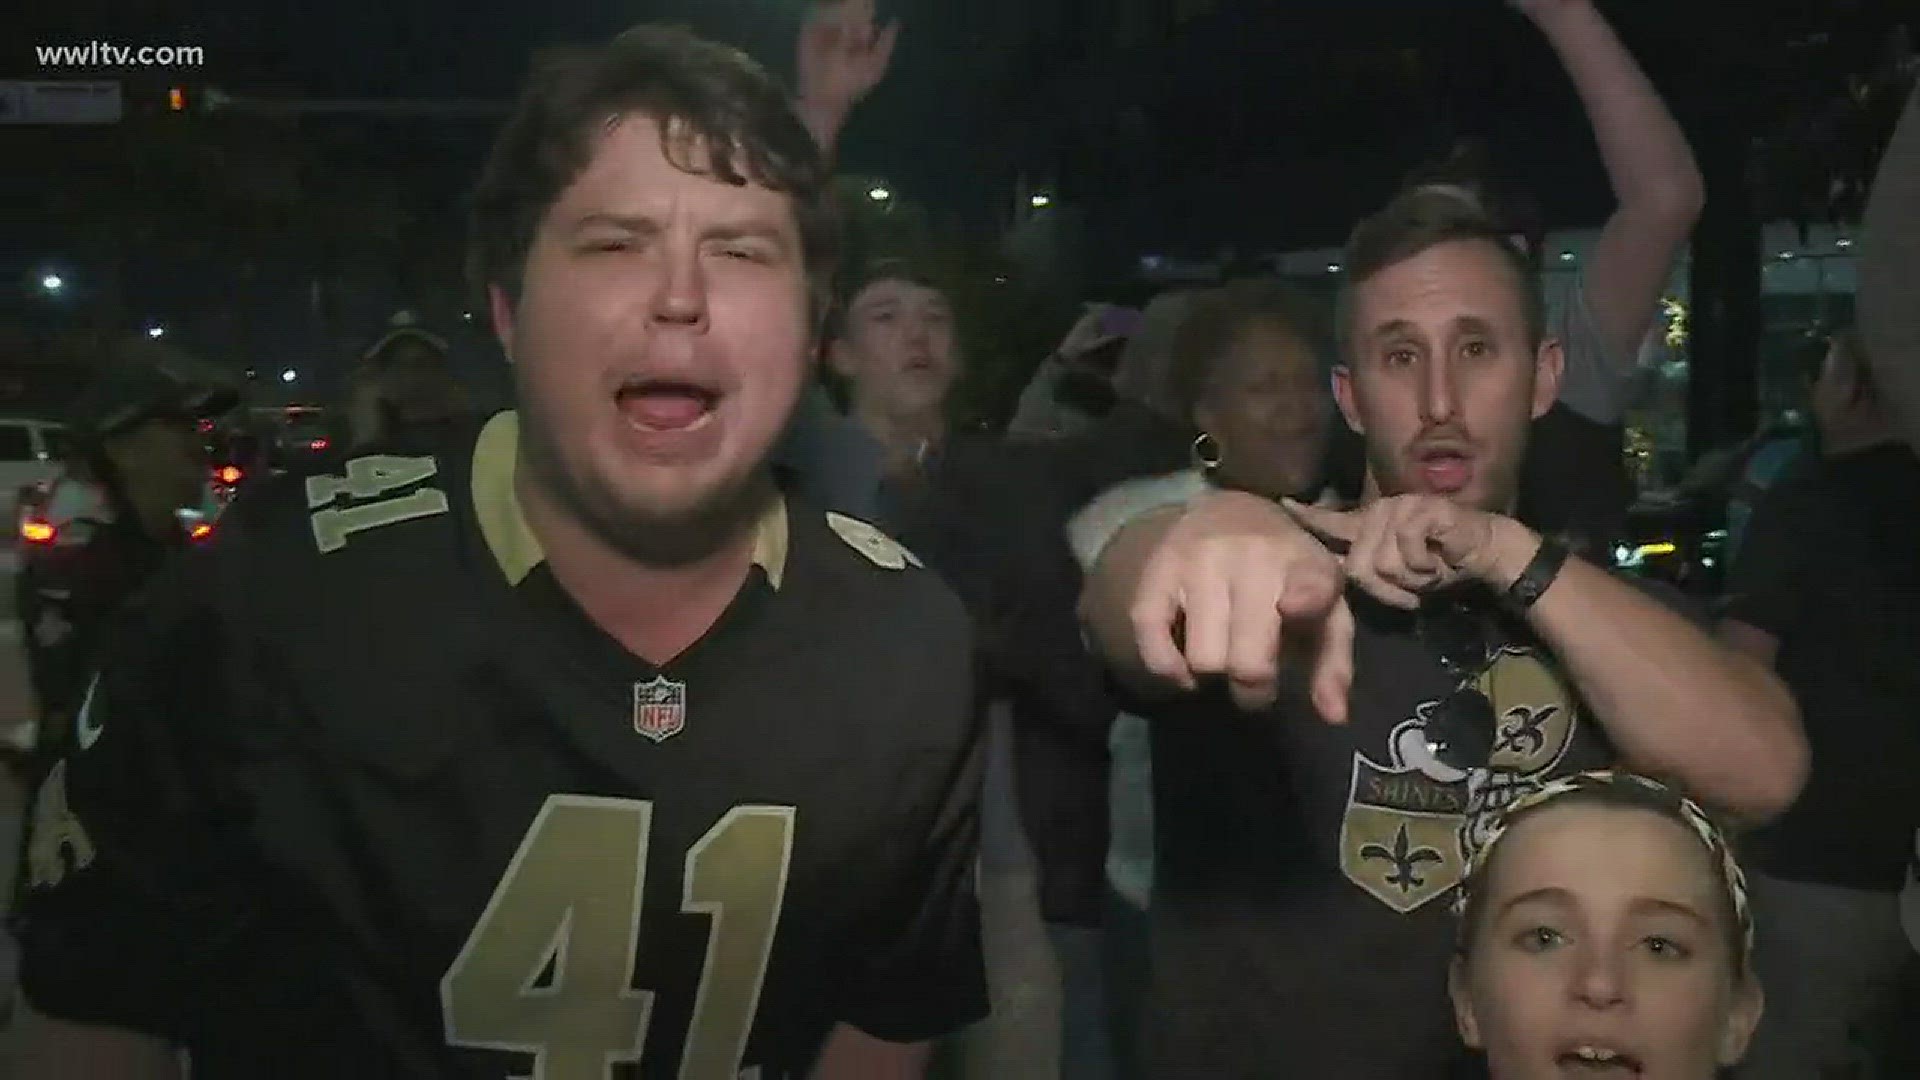 The Saints fans were hyped after the team's big win over the Panthers Sunday.